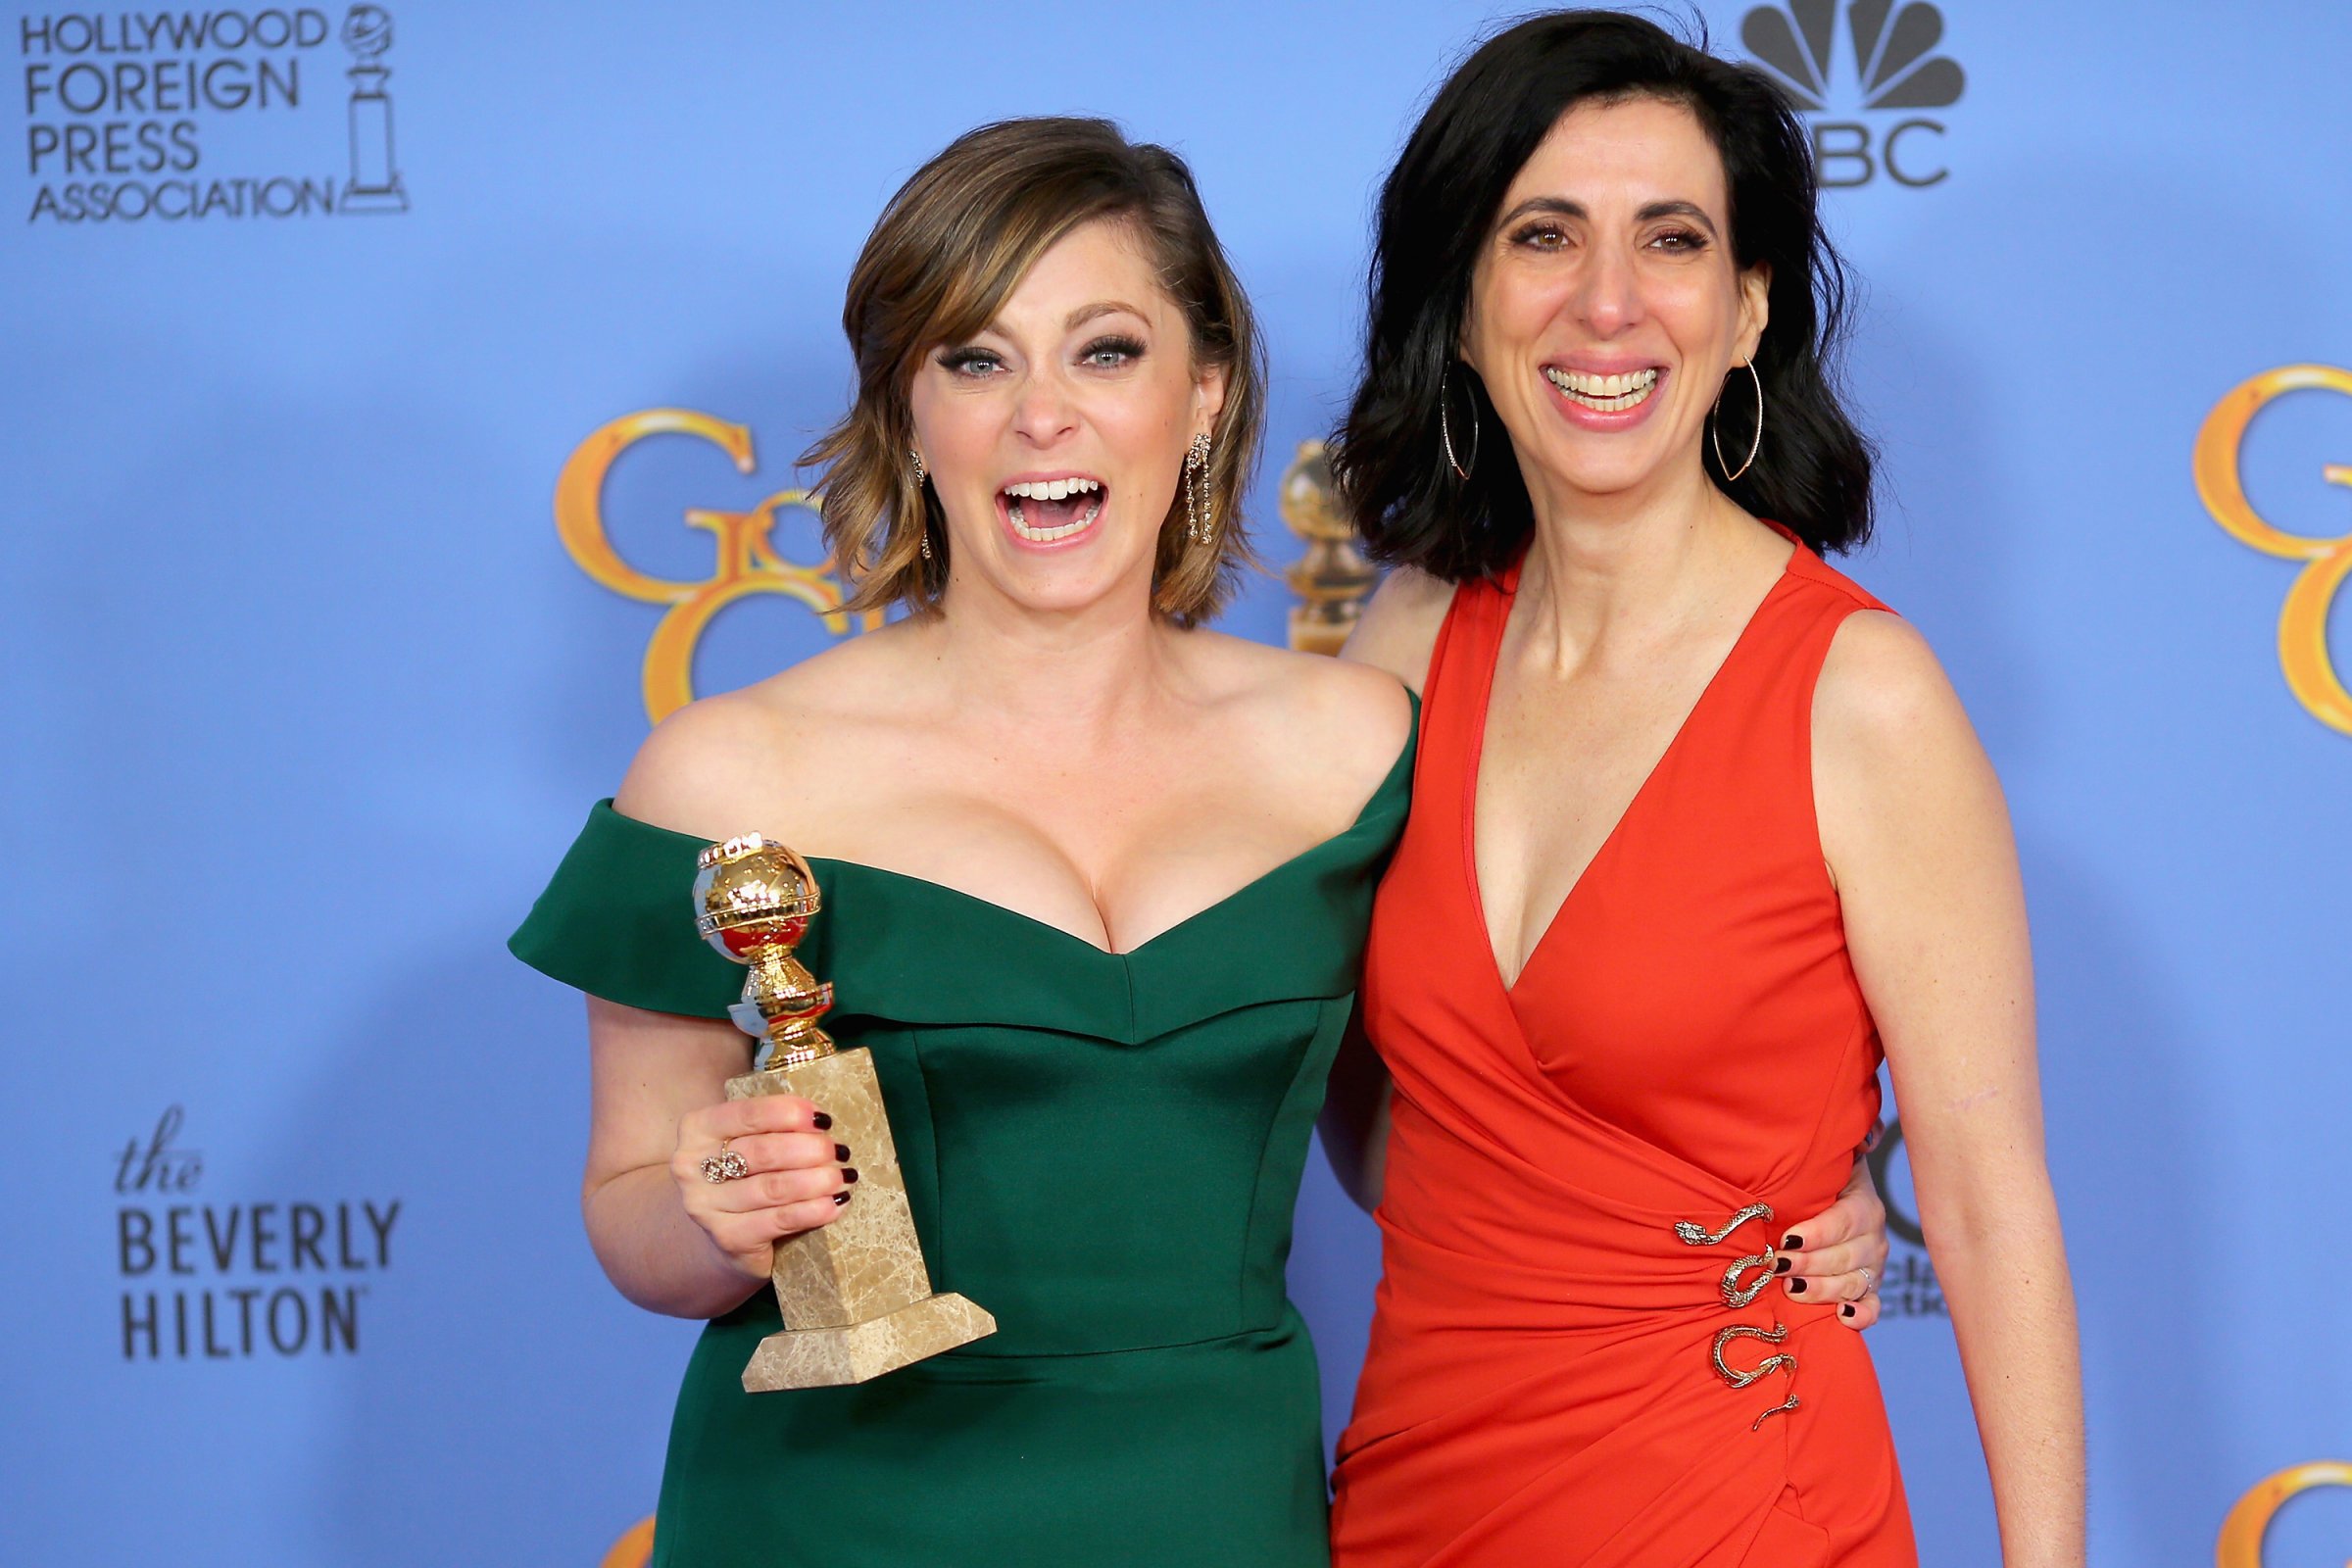 Actress Rachel Bloom, winner of Best Performance by an Actress in a Television Series - Musical or Comedy (L) and screenwriter Aline Brosh McKenna, pose in the press room during the 73rd Annual Golden Globe Awards held at the Beverly Hilton Hotel on January 10, 2016 in Beverly Hills, California.